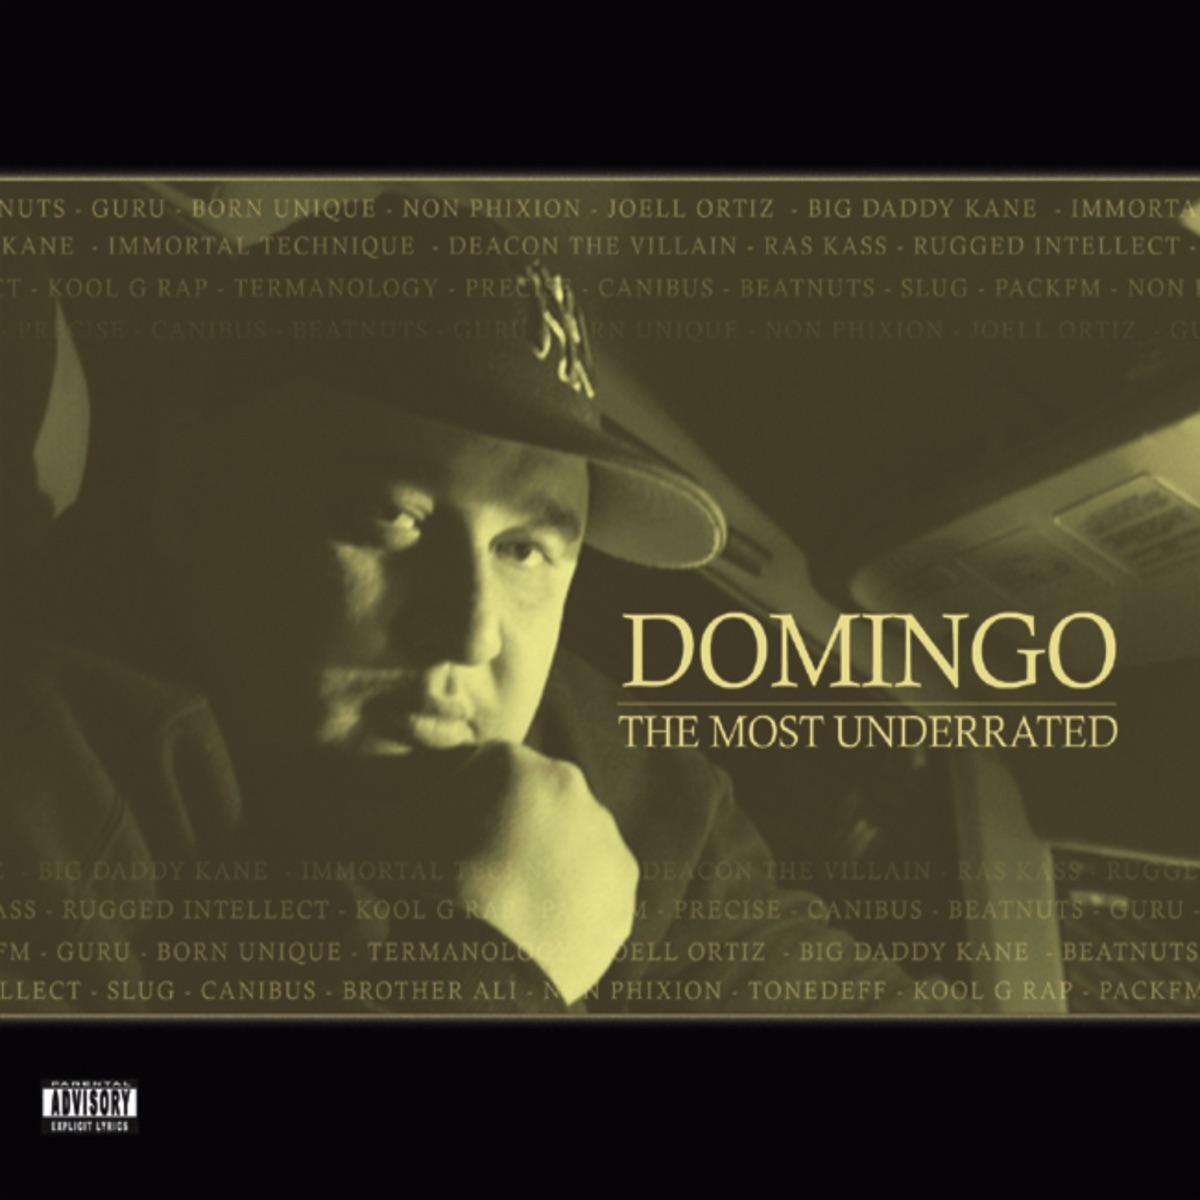 The Most Underrated - Album by Domingo - Apple Music